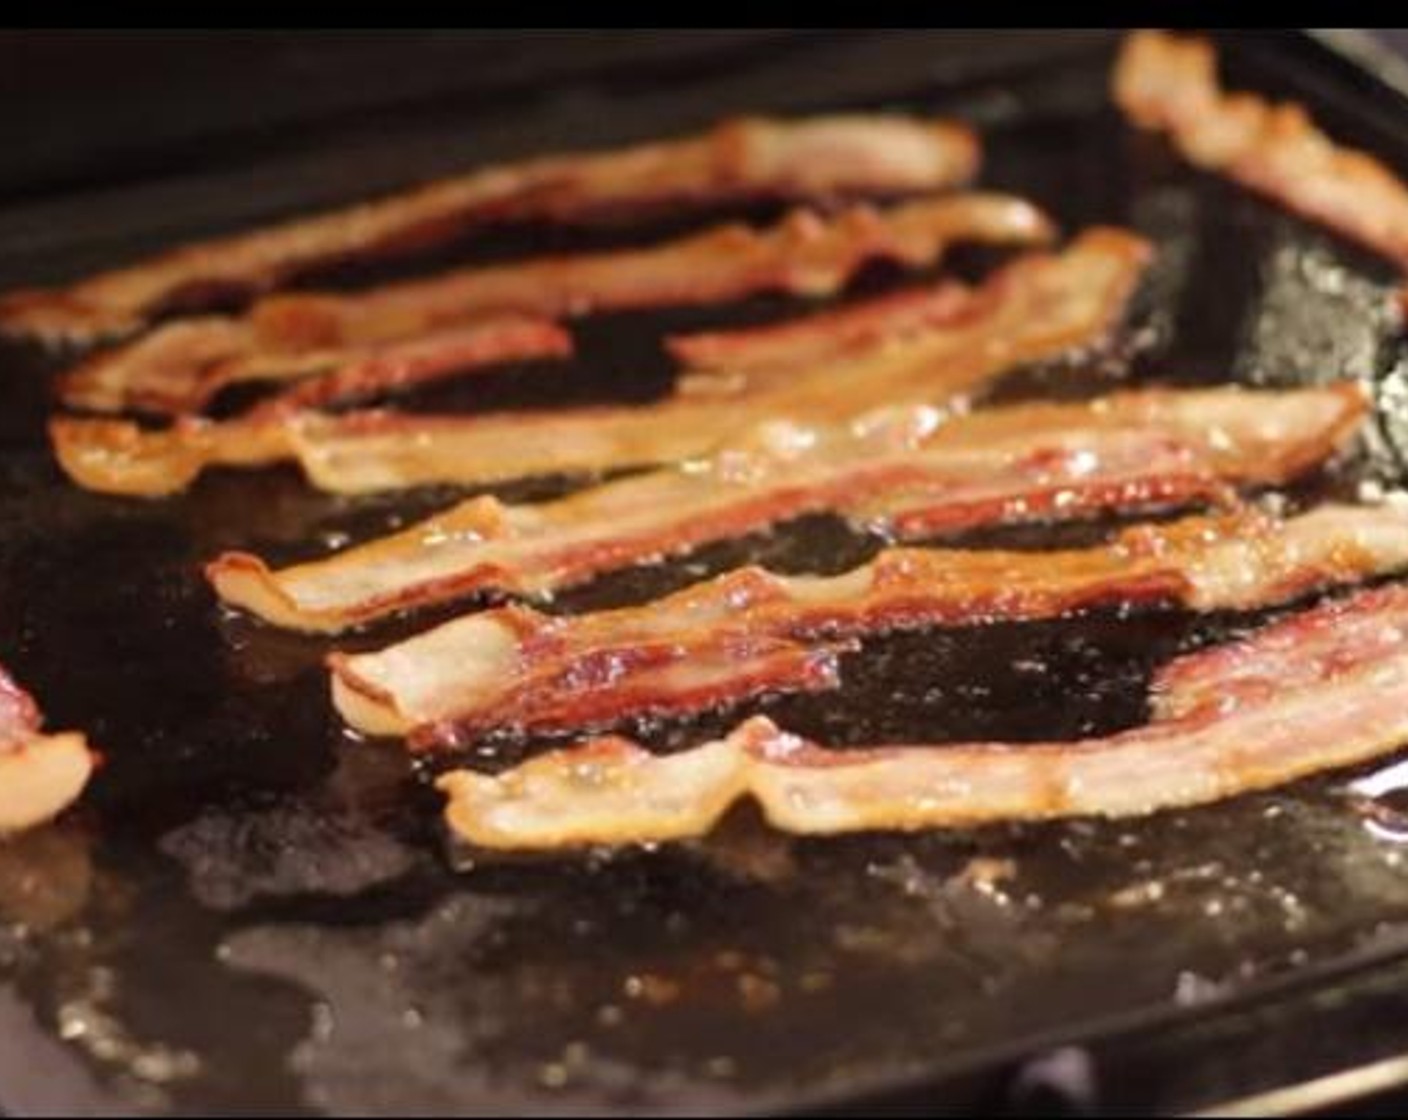 step 1 Grill or bake the Bacon (1 1/2 slices) until fully cooked, but soft and chewy.